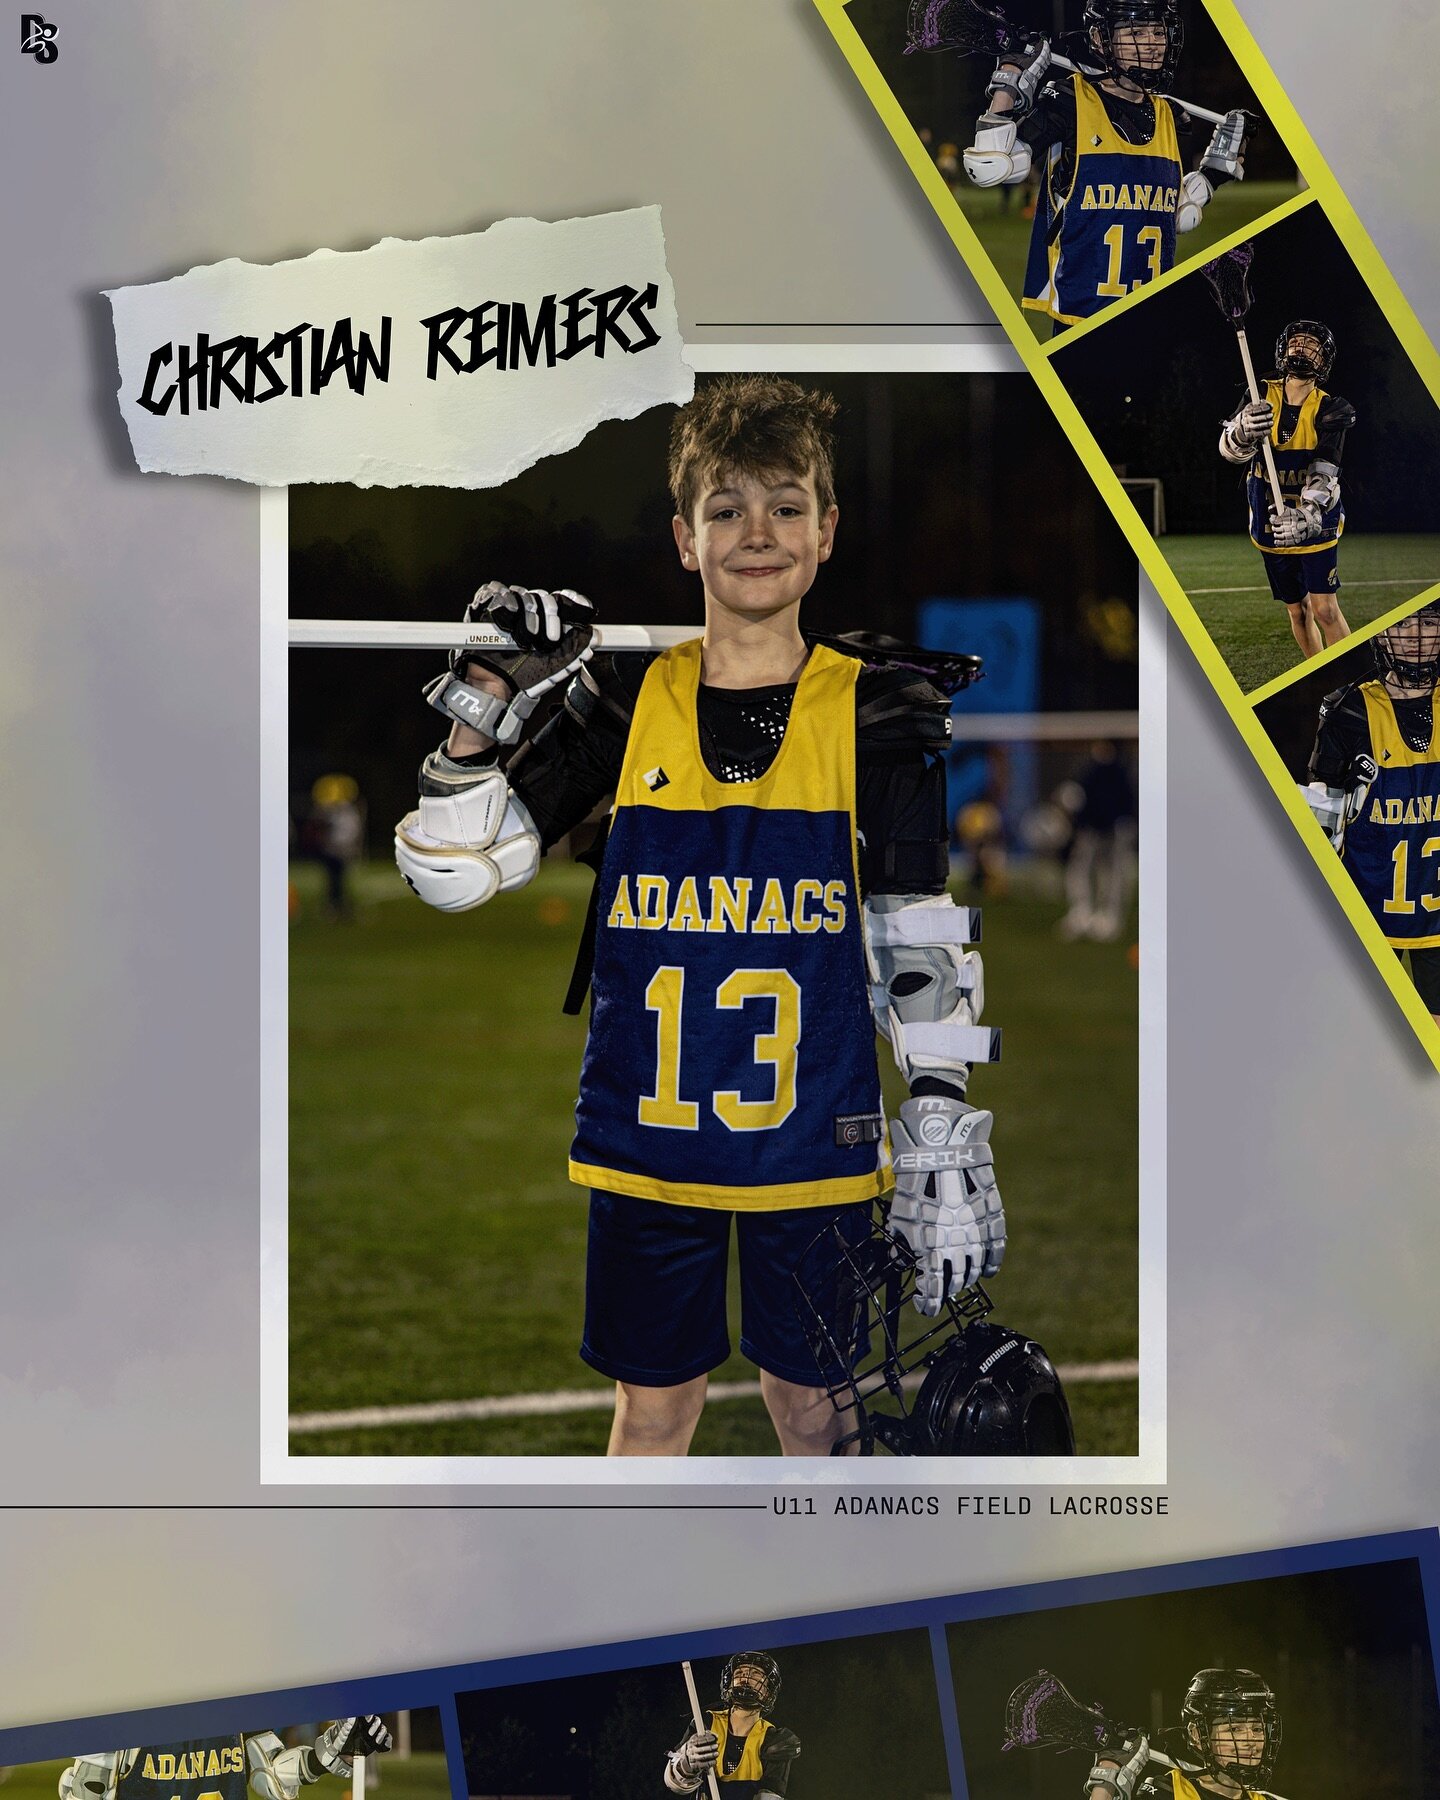 U11 ADANACS FIELD LACROSSE MEDIA DAY GRAPHIC!! 

Such a fun shoot with these athletes! Interested in booking? Send us a DM for more information⬅️

#sportsmedia  #adobe #vancouver #contentcreator #sportsmediaday #mediaday #sportsphotographer #sportsph